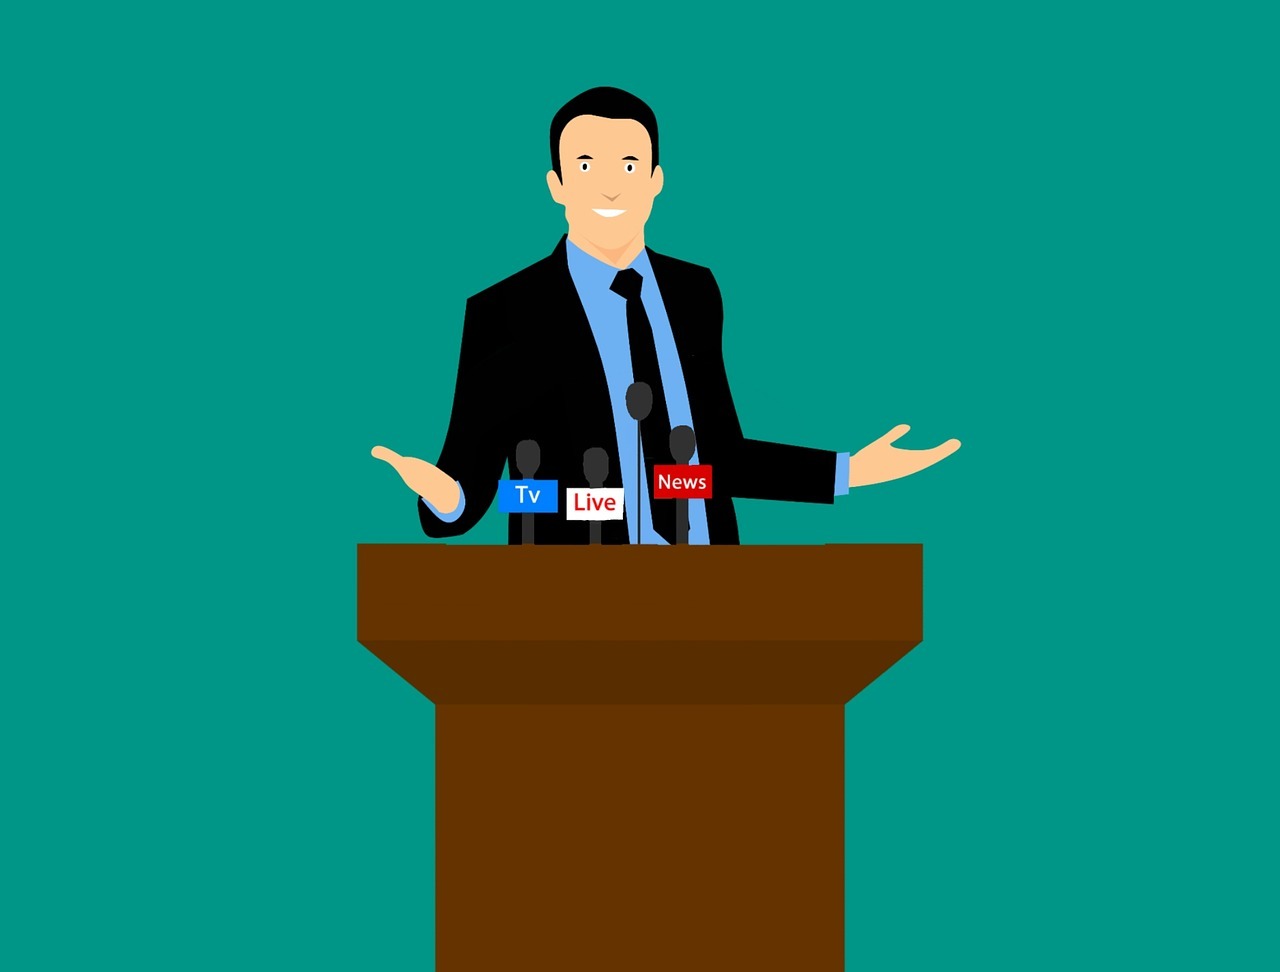 Tips to Improve Your Public Speaking Skills